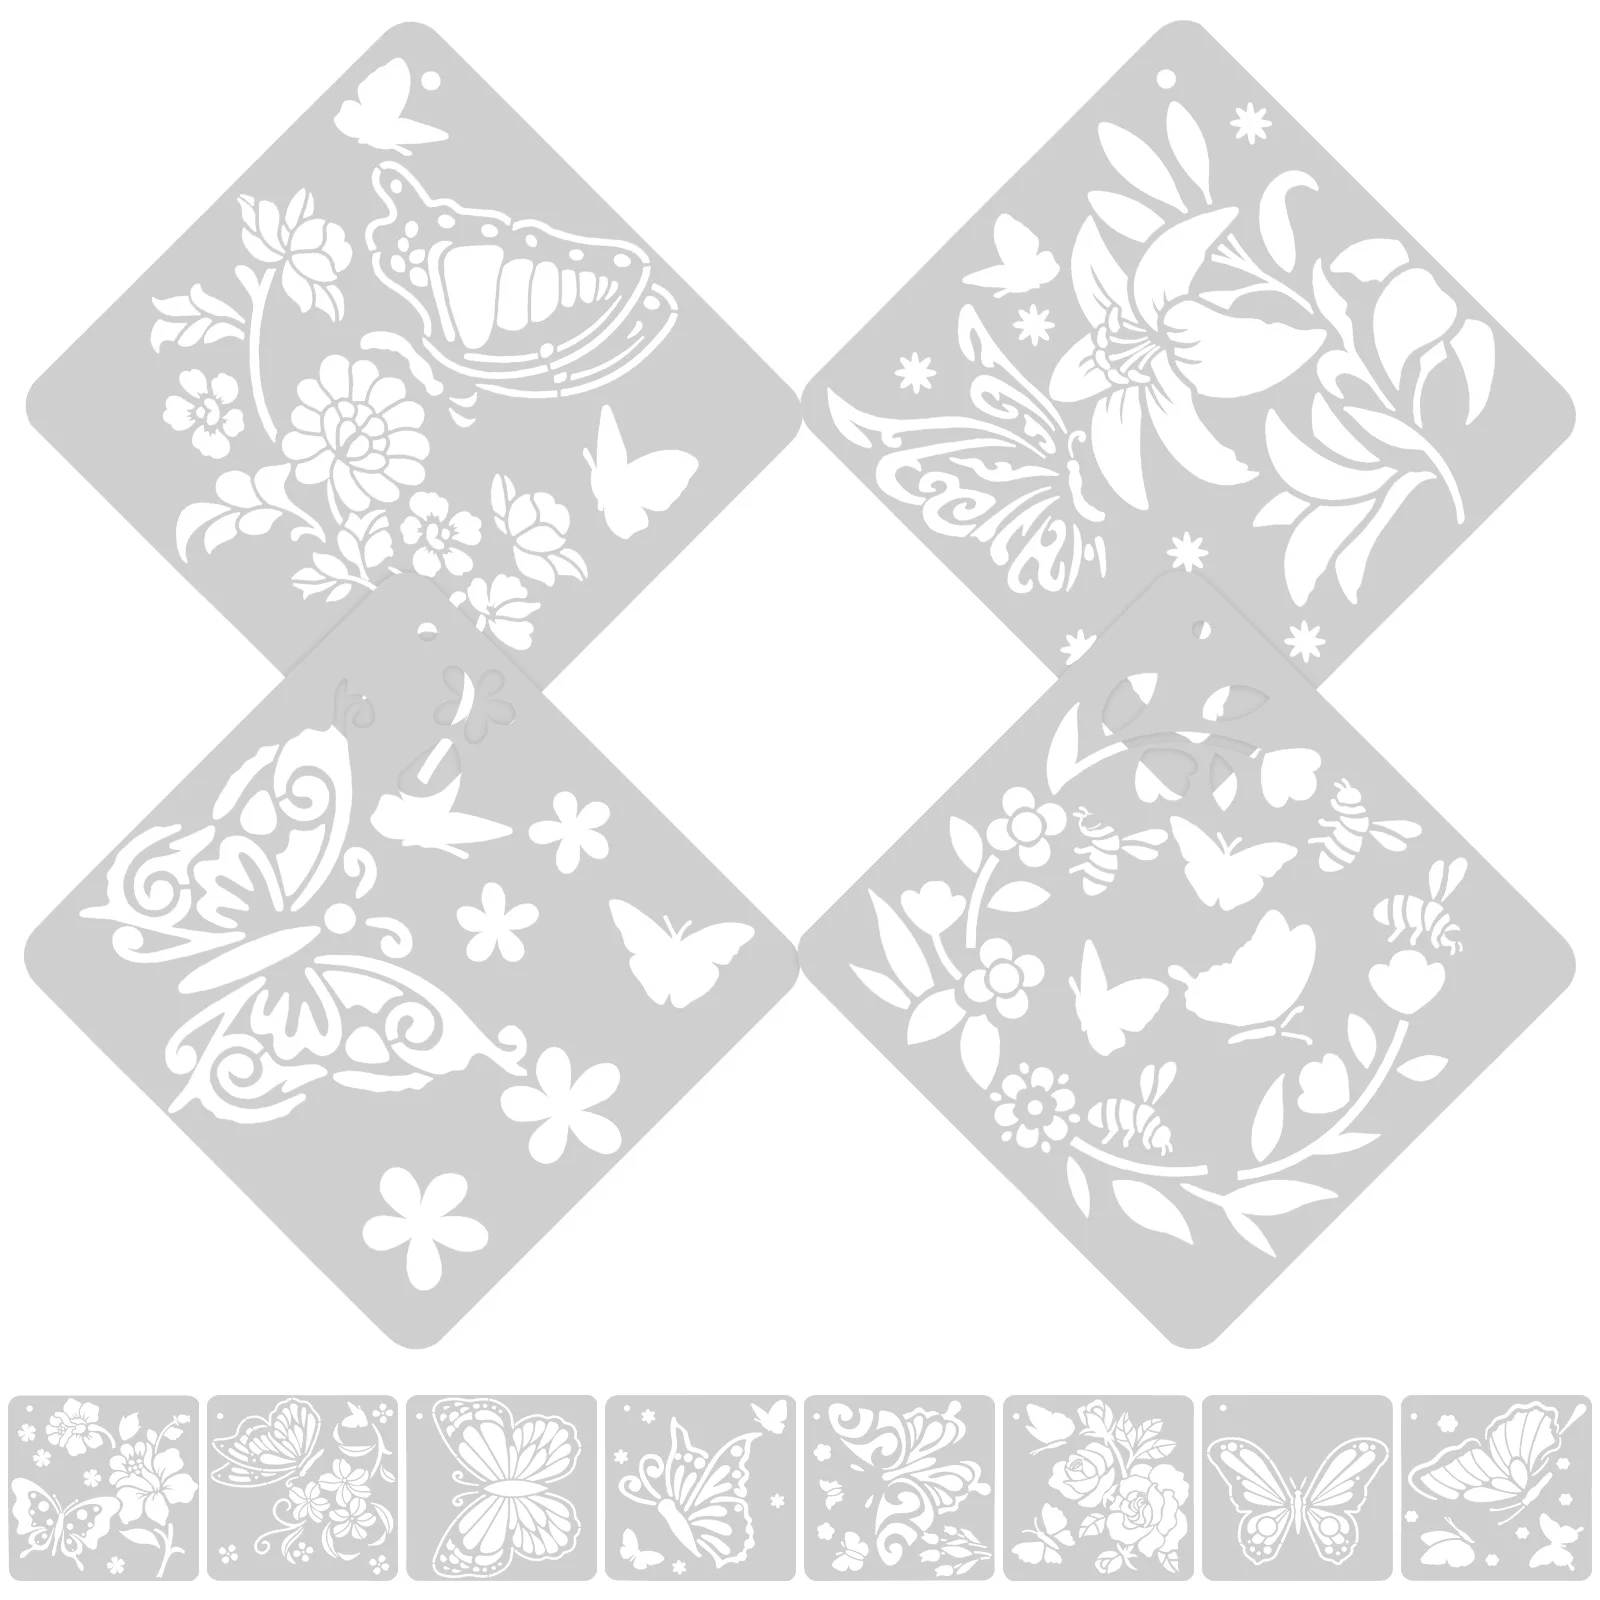 Butterfly Stencil Butterfly Painting Stencil Craft Stencil Large Stencils Coloring Embossing Album lovely cartoon butterfly stencil metal cutting dies cut practice hands on diy scrapbooking album craft dies photo album